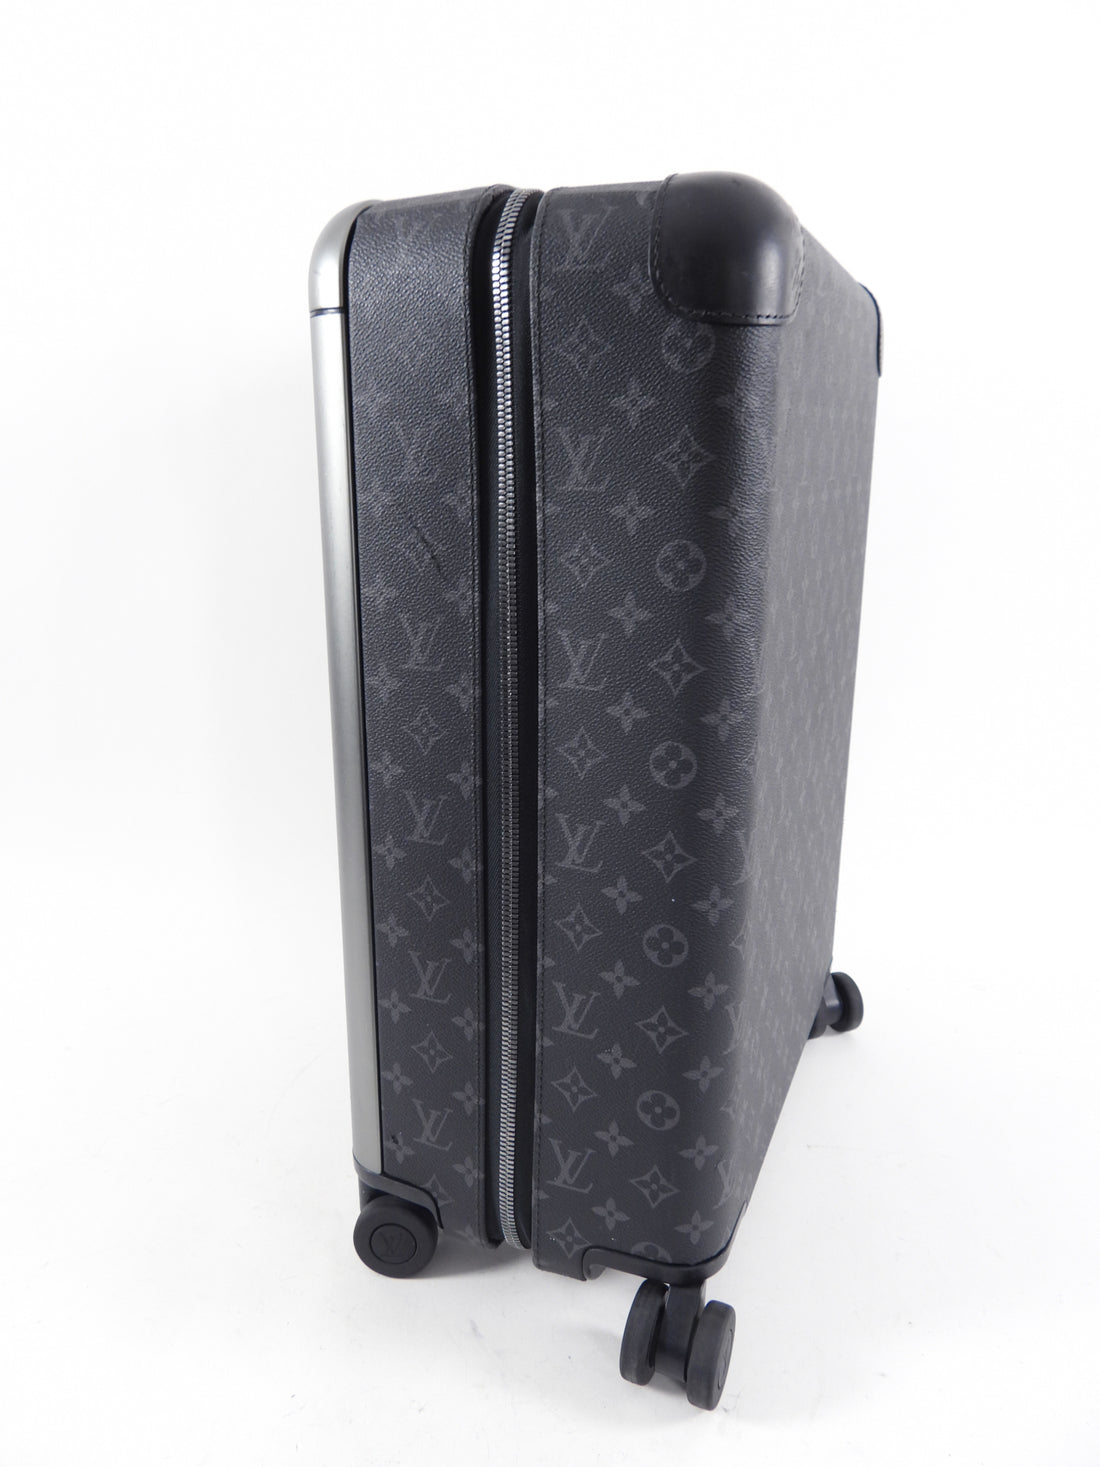 Louis Vuitton Blue Monogram Horizon 55 Luggage used by Lionel